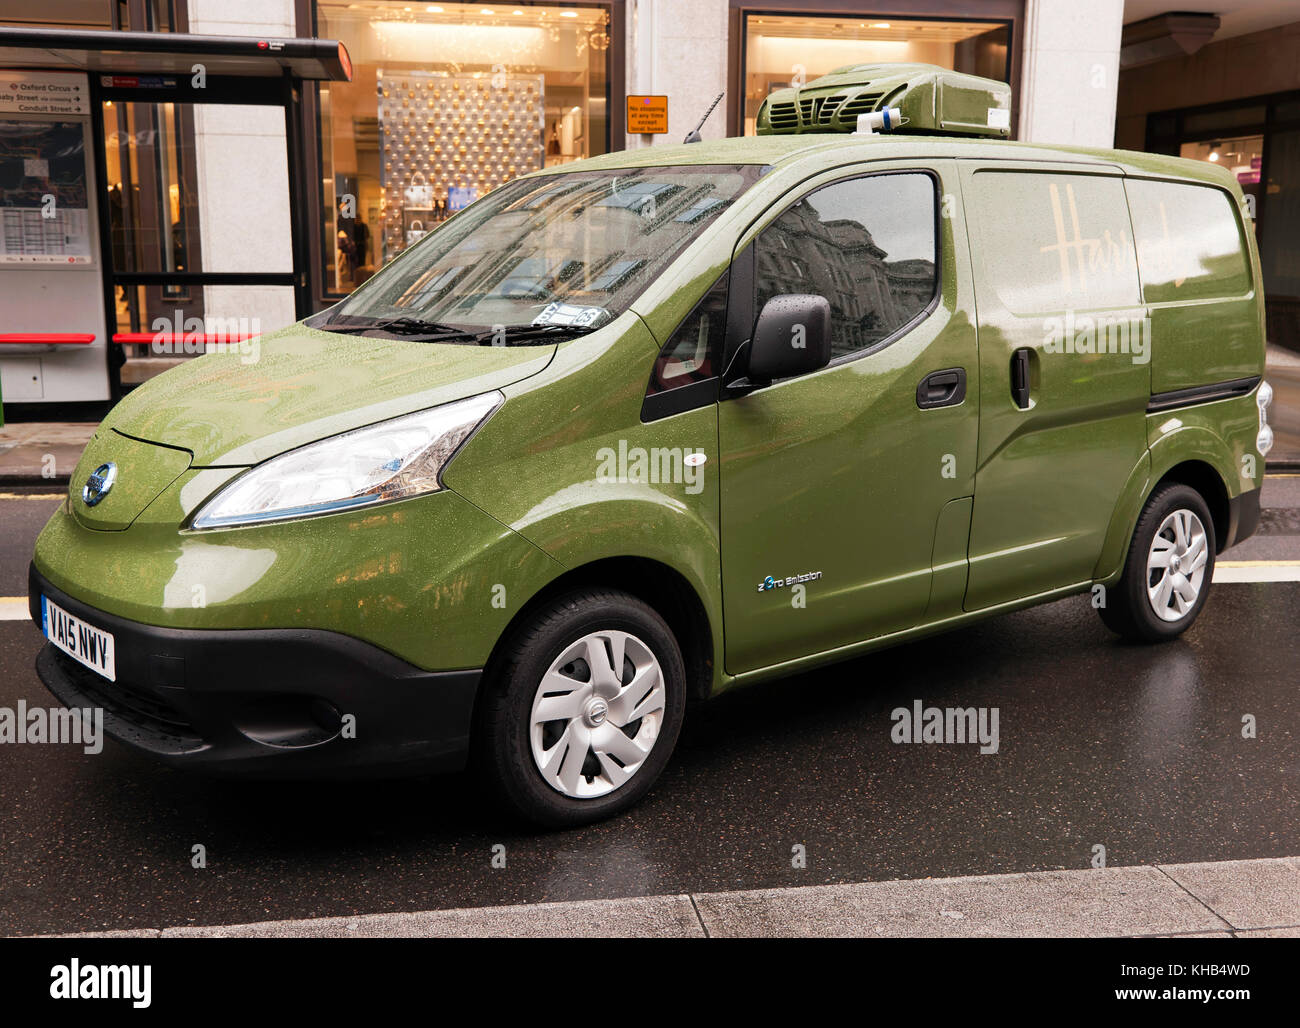 Three-quarter  front view of a  Harrods, Nissan e-NV200 electric delivery van on display  during the Regents Street Motor Show 2017 Stock Photo